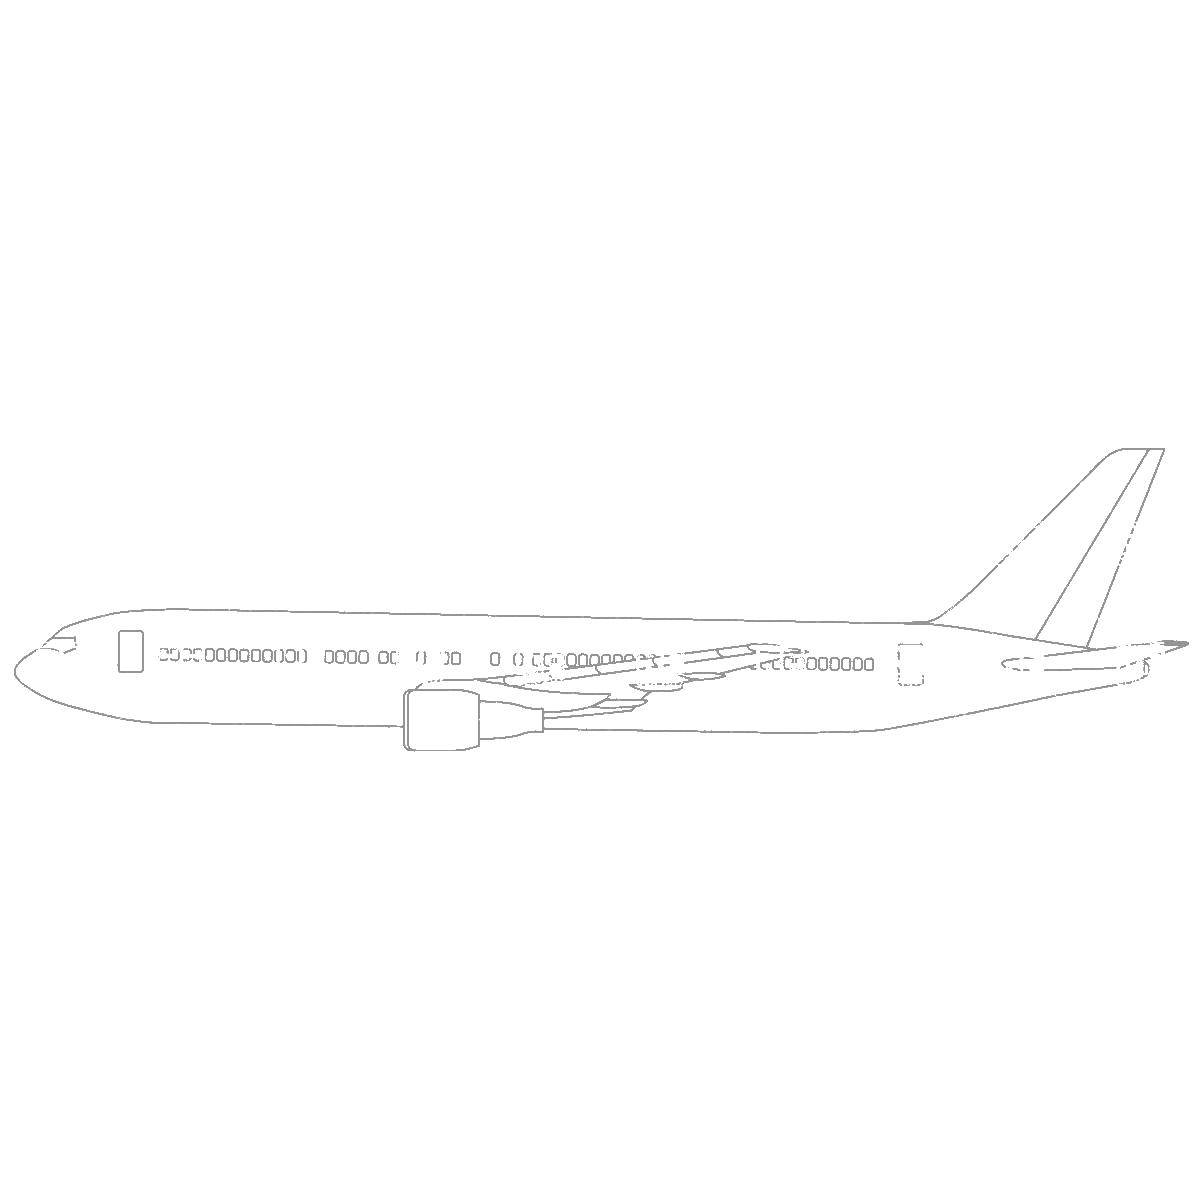 Coloring Long plane. Category the planes. Tags:  aircraft, airplane, passenger plane.